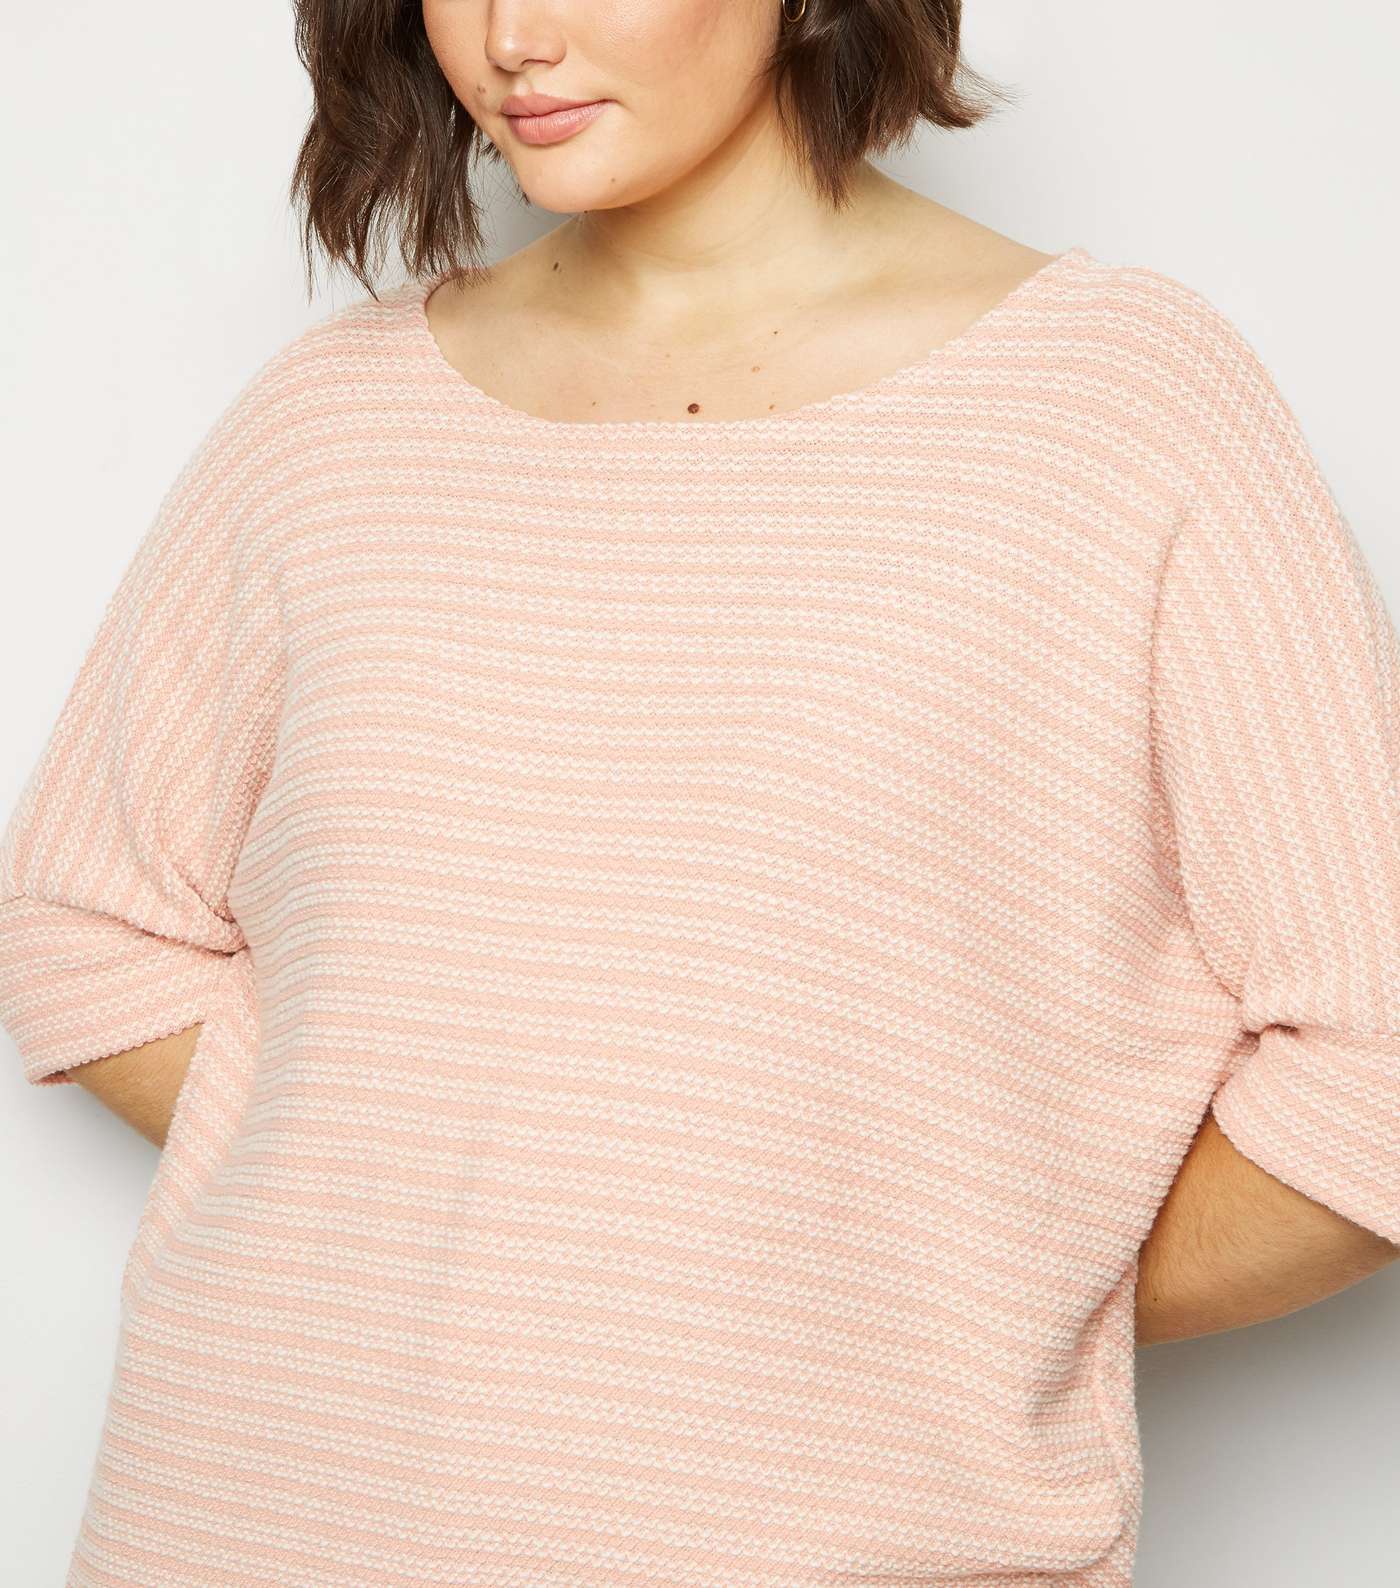 Apricot Curves Pink Batwing Waffle Knit Top Image 5